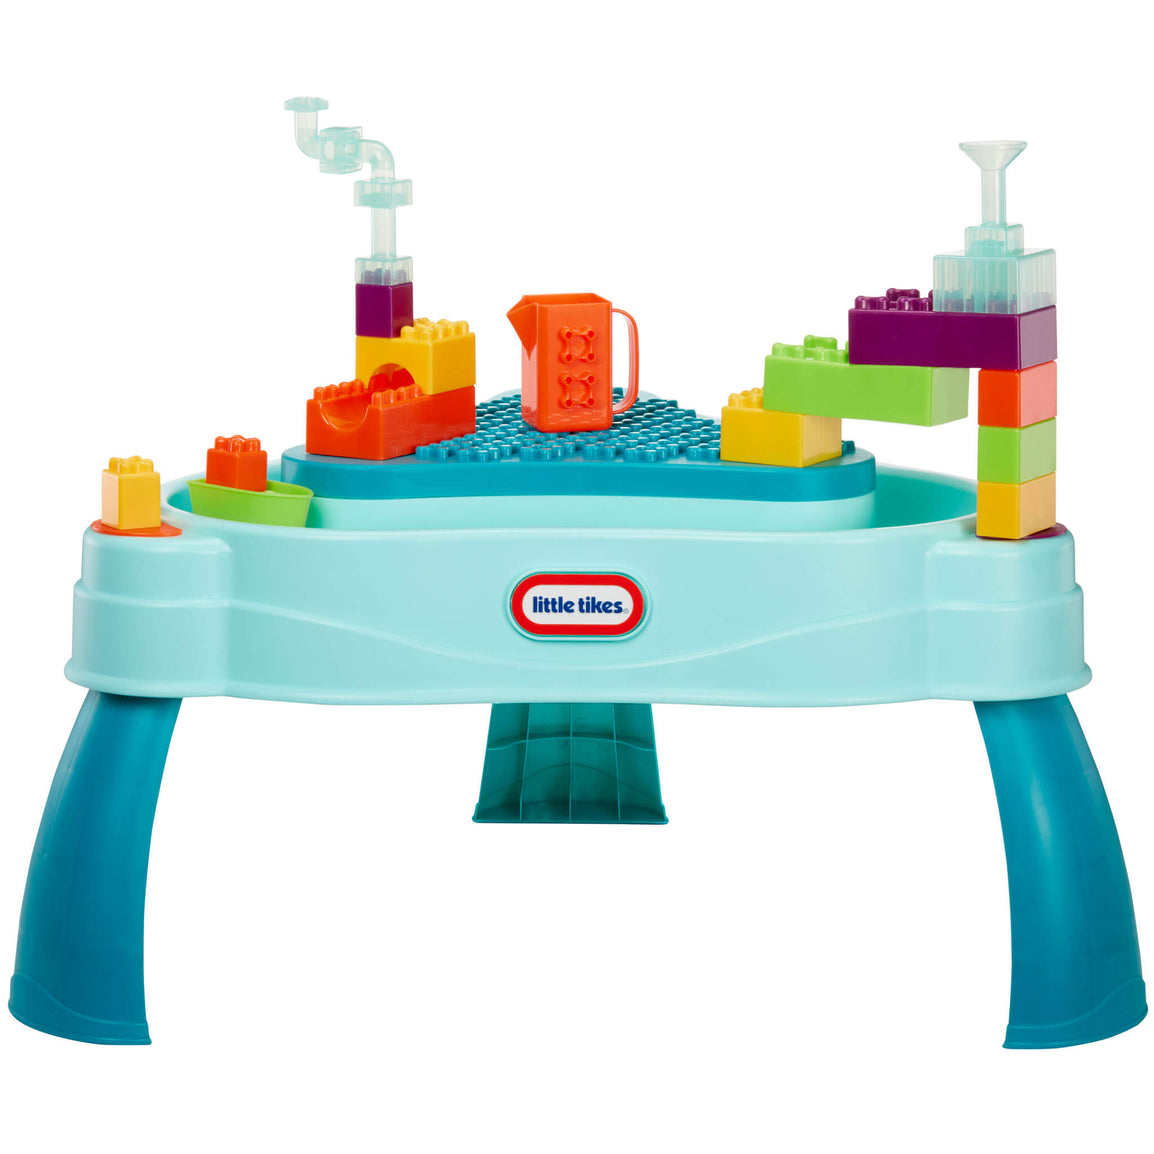 Build & Splash™ Water Table with 25+ Accessories - Official Little Tikes Website